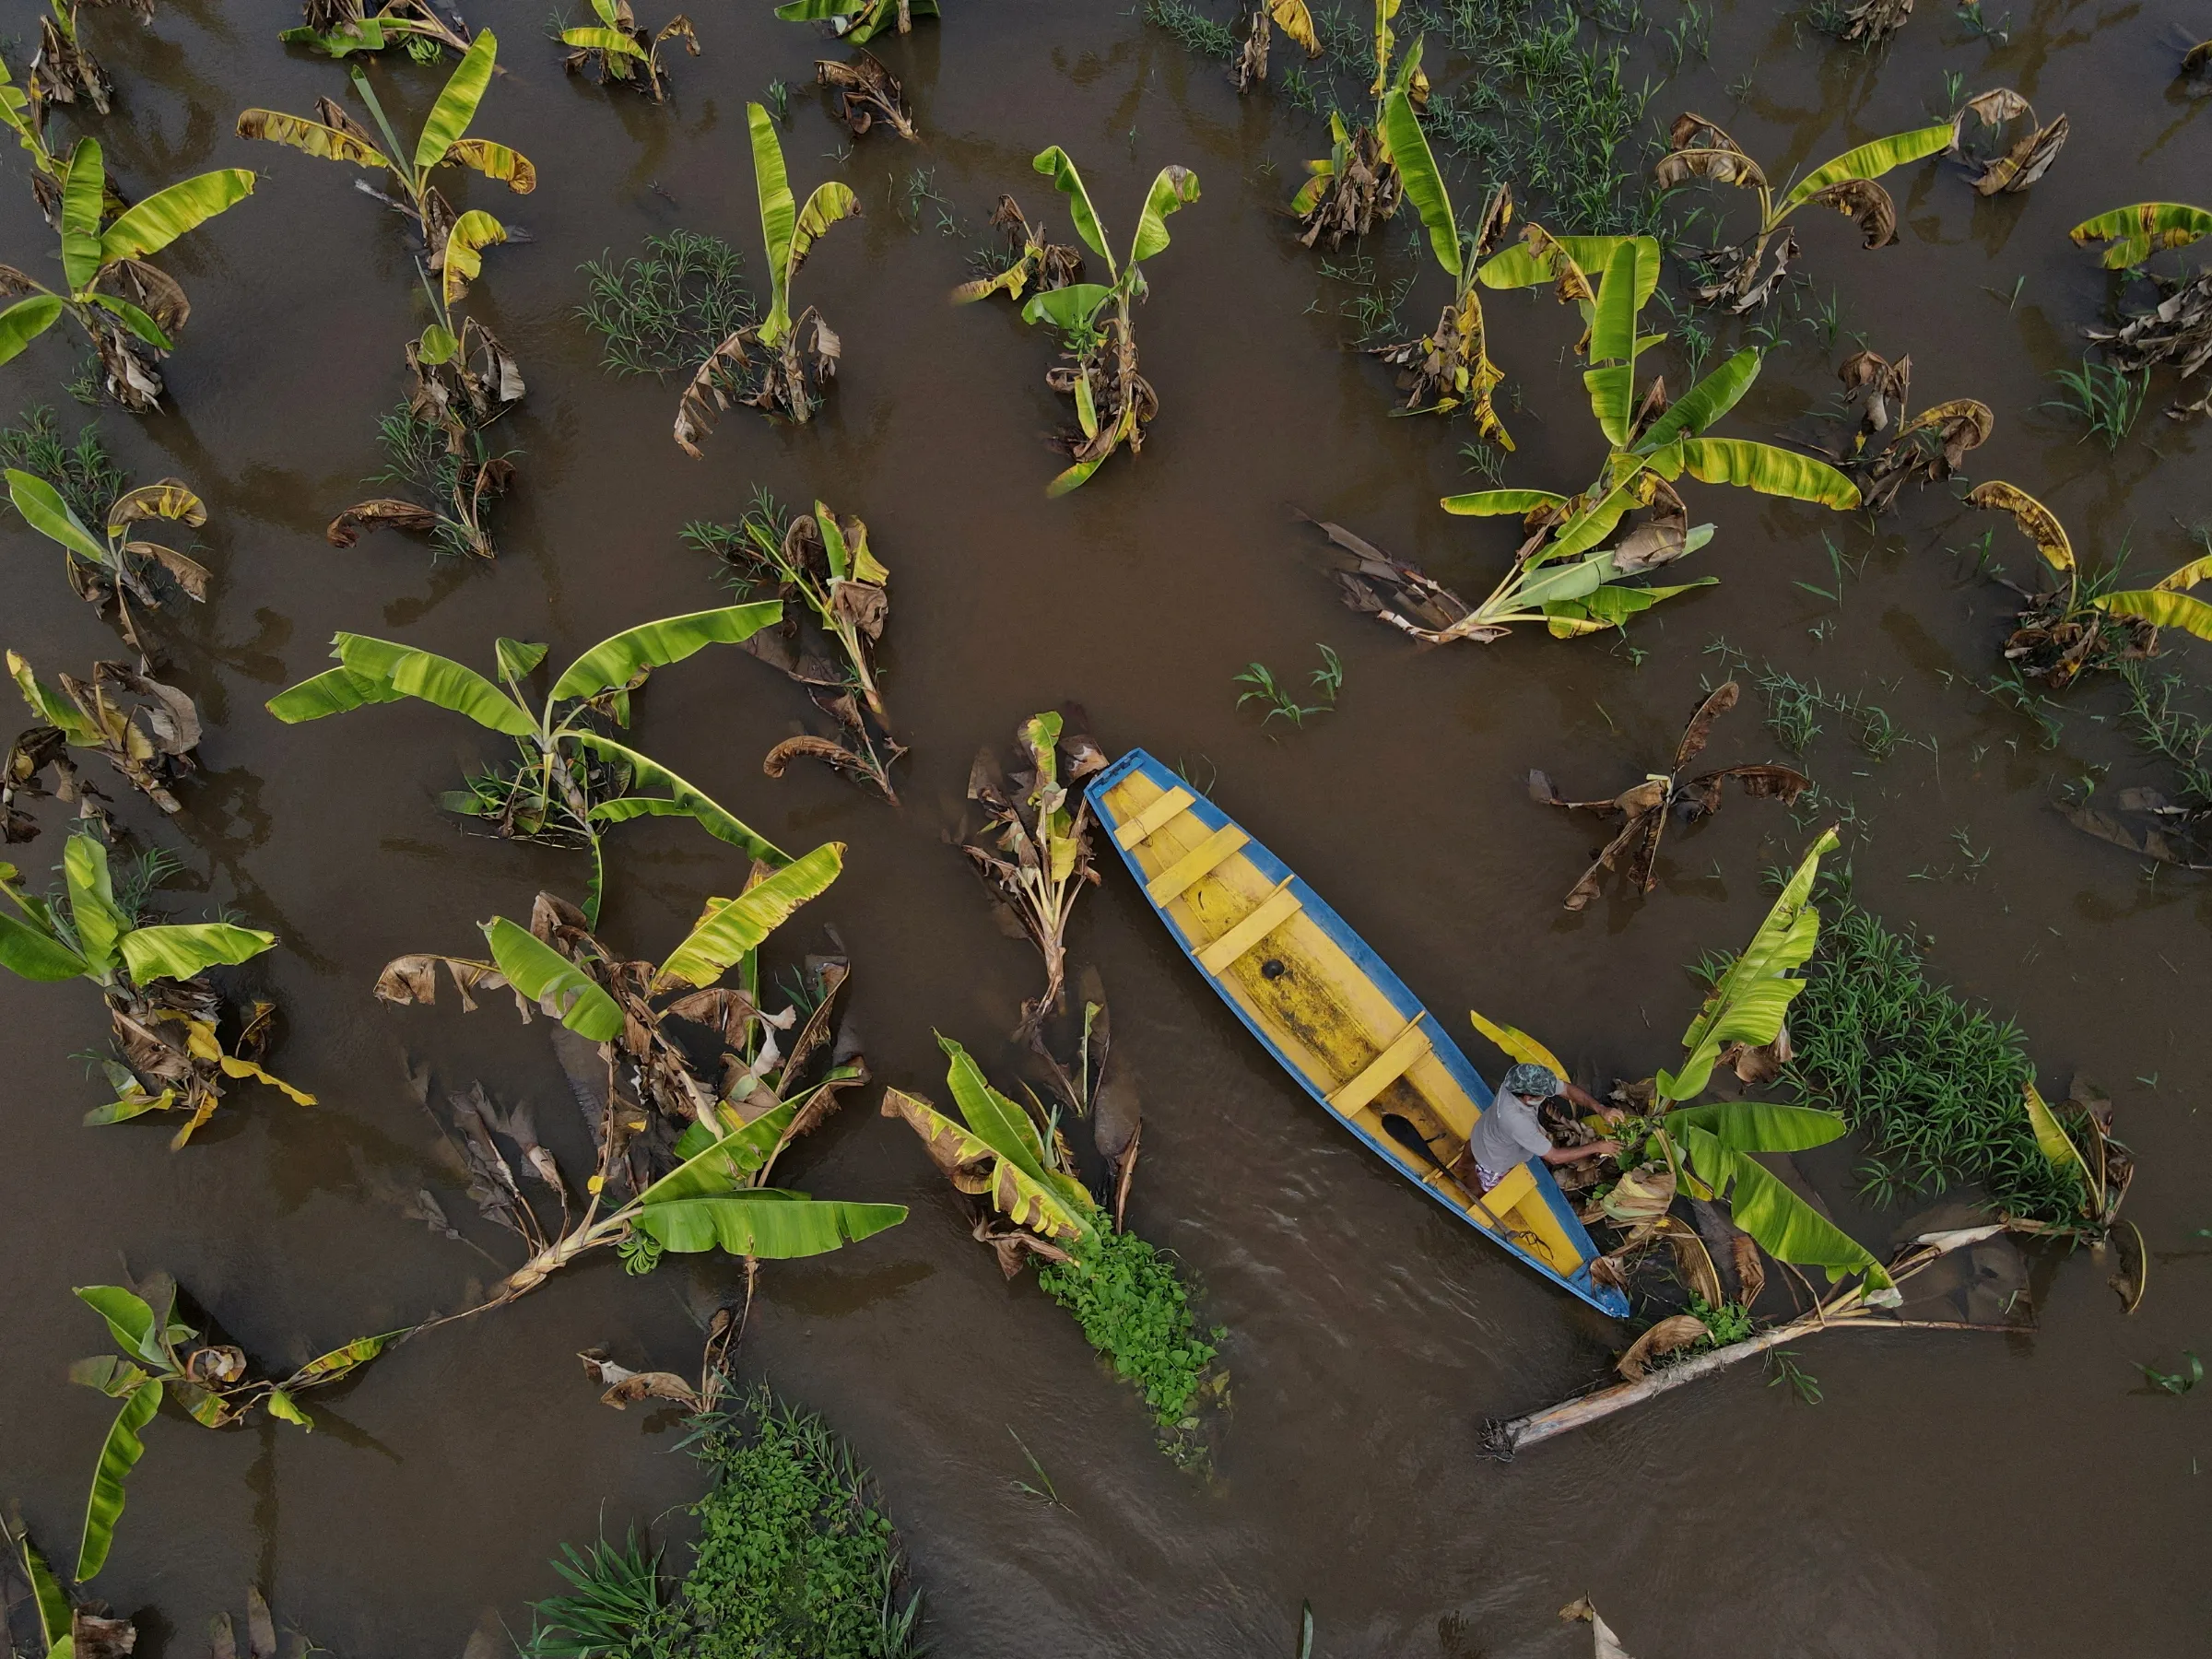 A farmer collects bananas in his flooded plantation